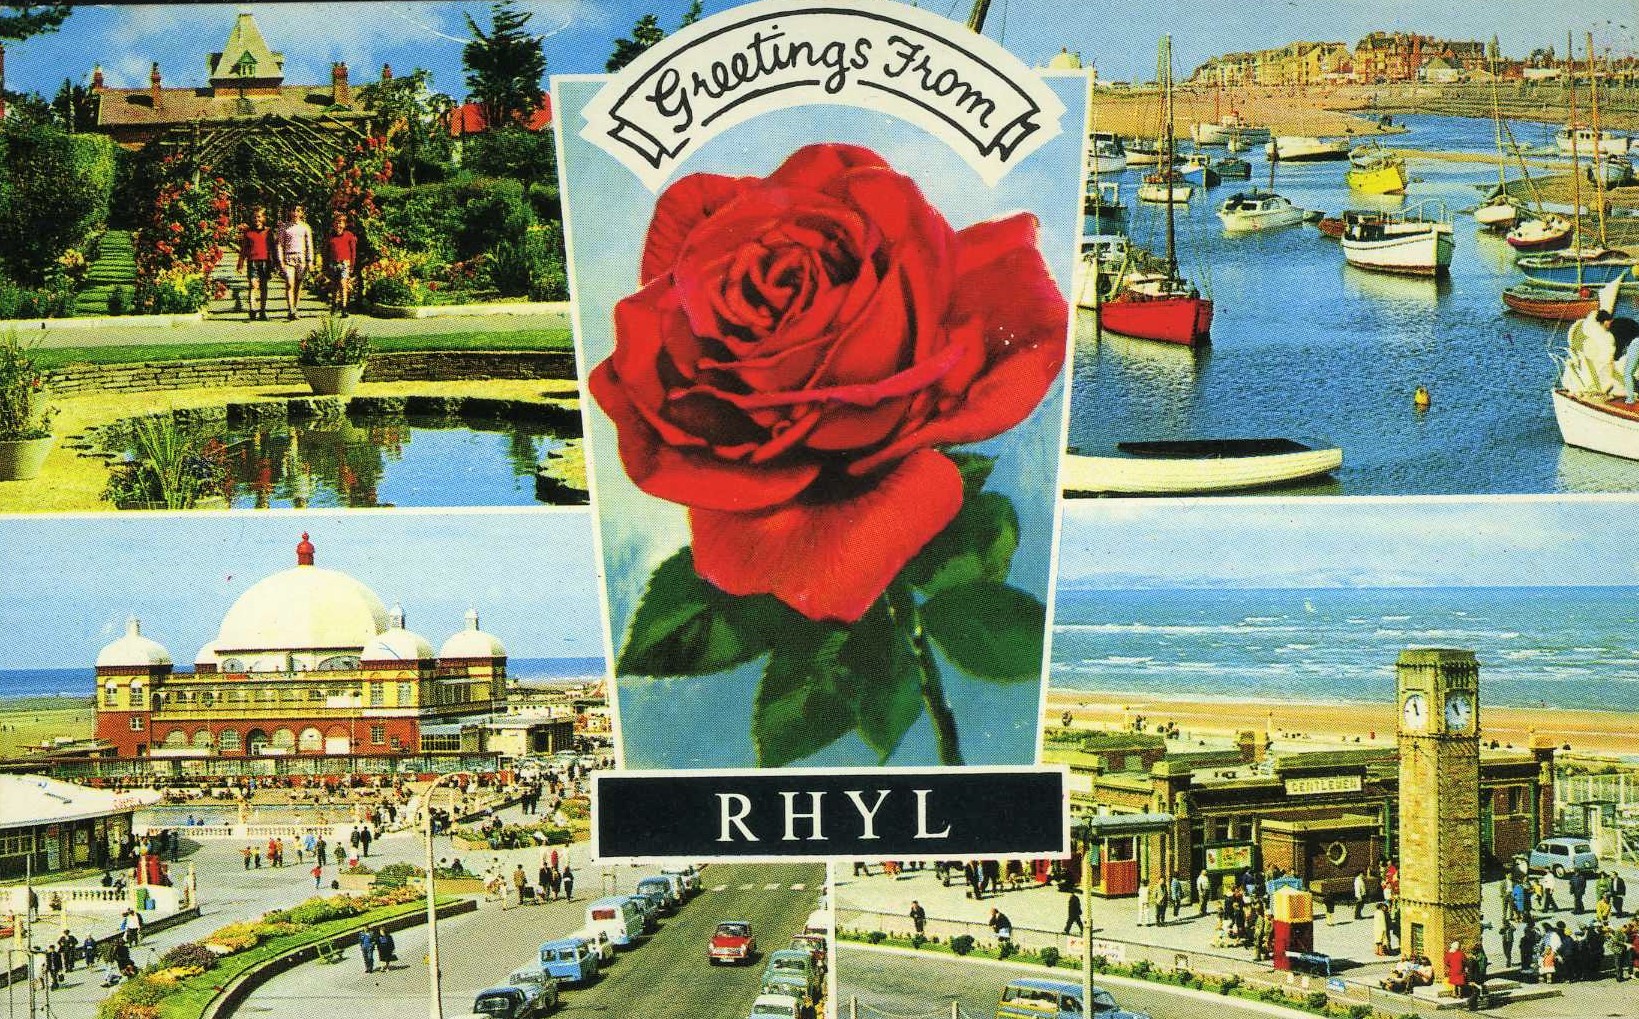 Postcard from Rhyl, date stamped 1972. Courtesy of the Elvet Pierce collection